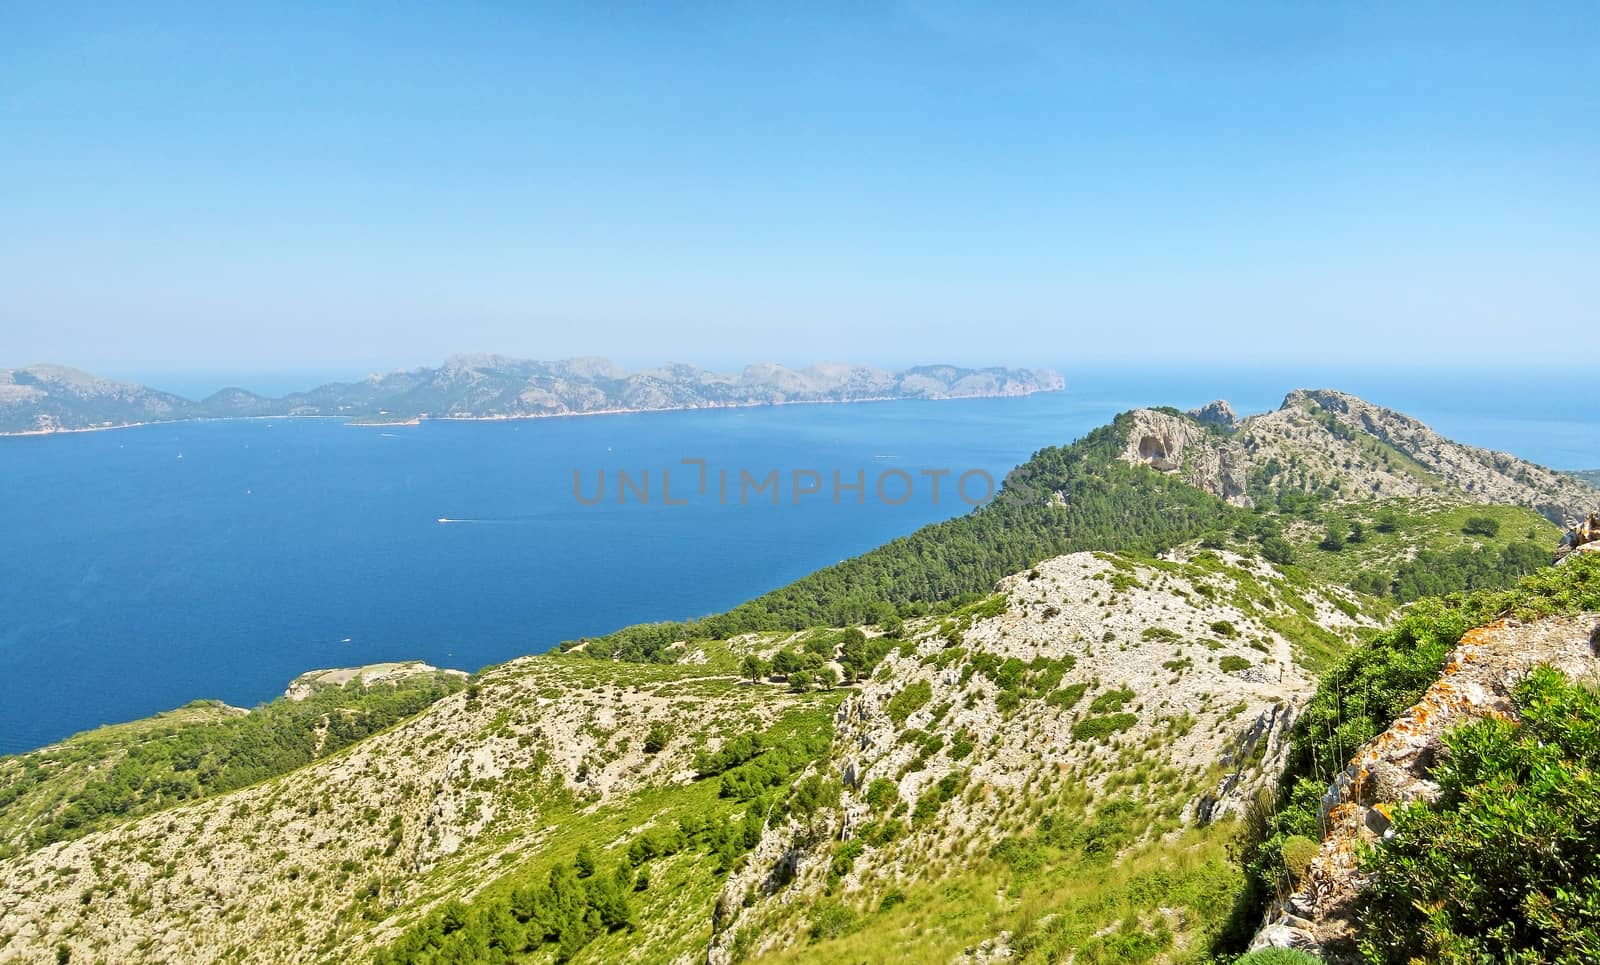 Bay of Pollenca, view from peninsula Victoria - peninsula Formentor in background - ocean view panorama